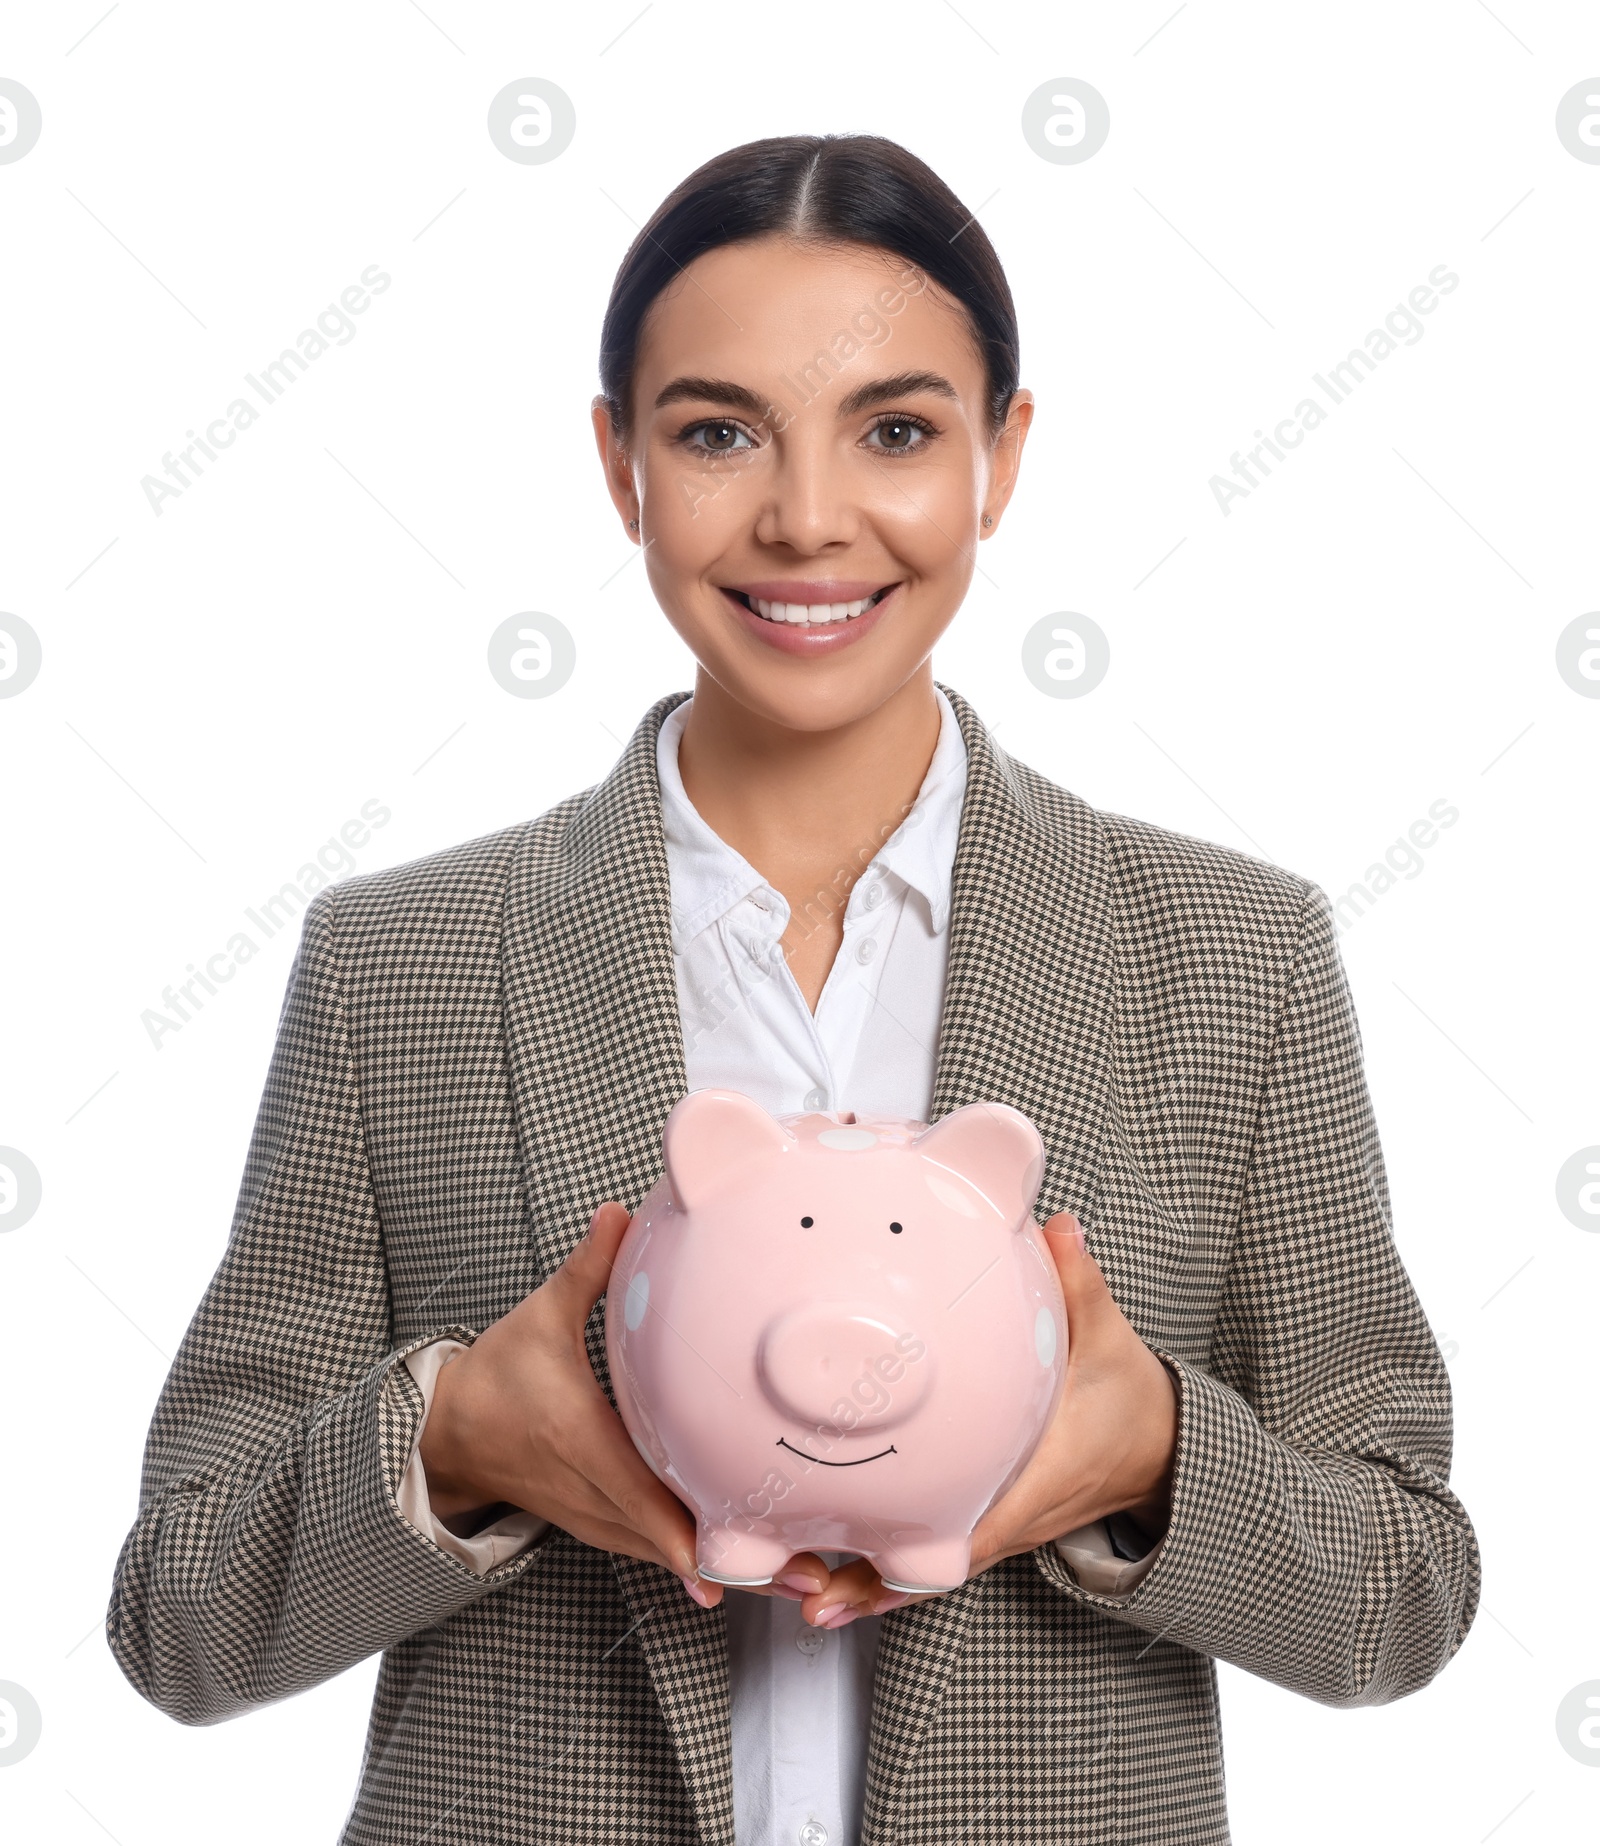 Photo of Happy young businesswoman with piggy bank on white background